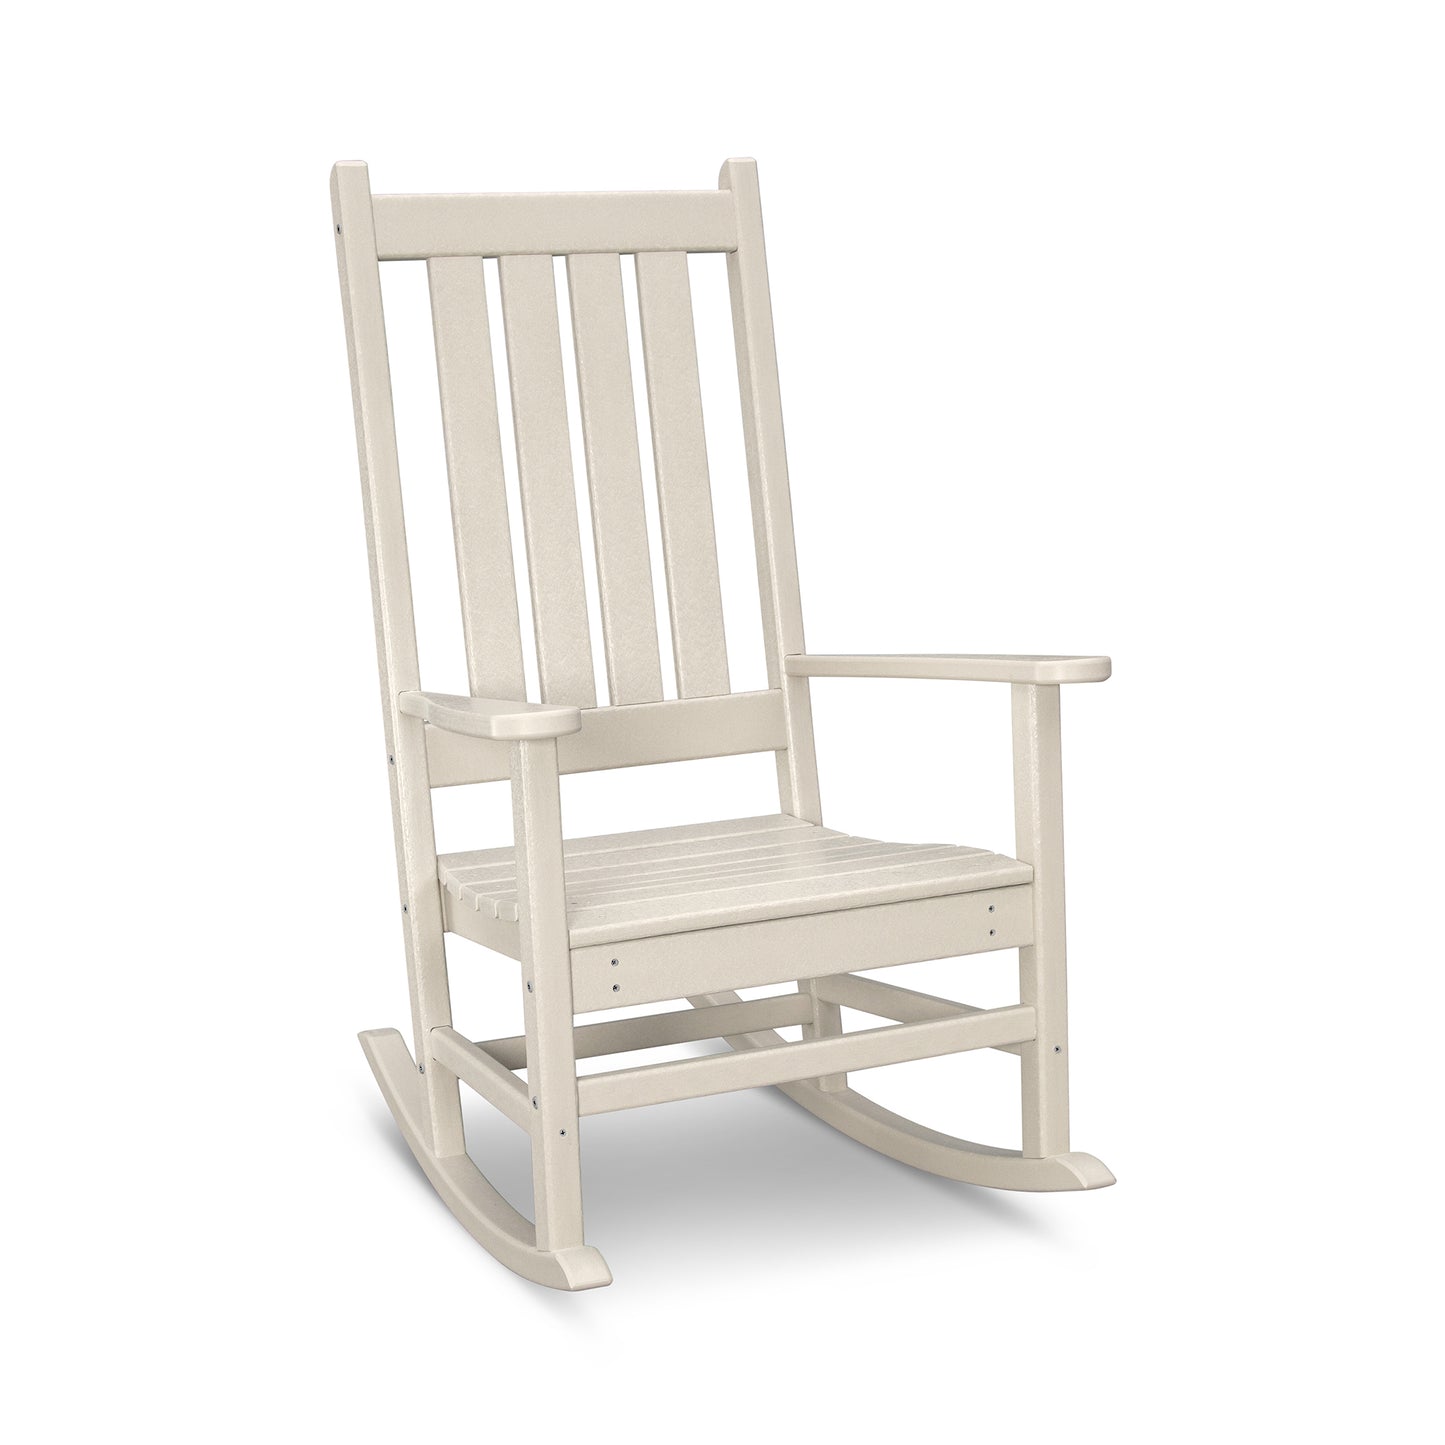 A traditional white POLYWOOD® Vineyard Porch Rocking Chair isolated on a plain white background, featuring weather-resistant construction, a vertical slat back, and armrests for comfort.